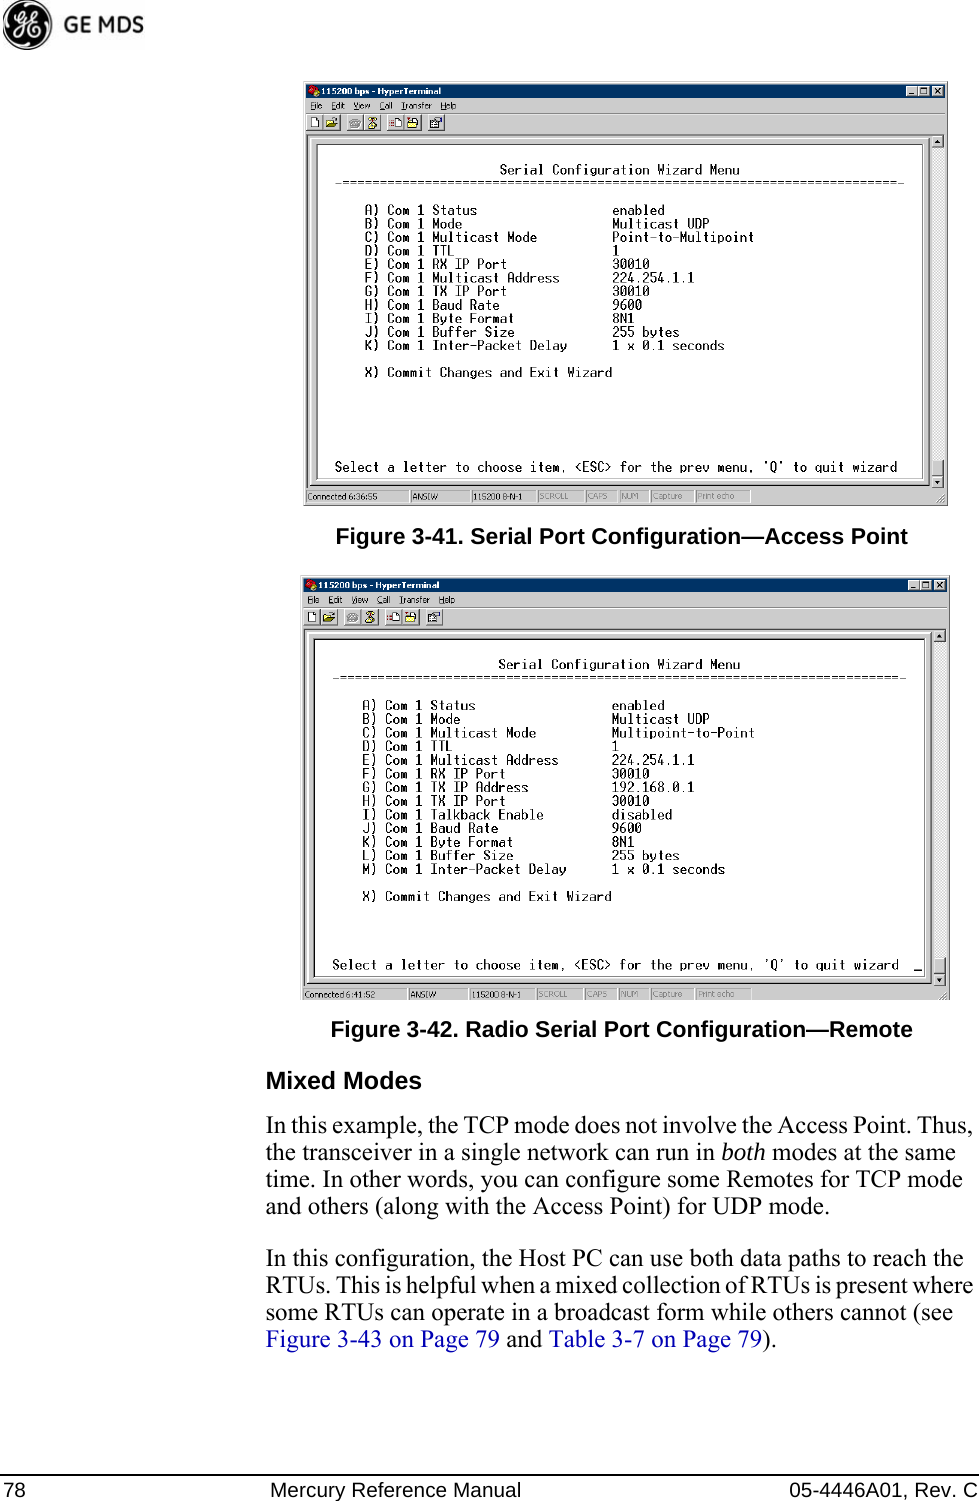 78 Mercury Reference Manual 05-4446A01, Rev. CFigure 3-41. Serial Port Configuration—Access PointFigure 3-42. Radio Serial Port Configuration—RemoteMixed ModesIn this example, the TCP mode does not involve the Access Point. Thus, the transceiver in a single network can run in both modes at the same time. In other words, you can configure some Remotes for TCP mode and others (along with the Access Point) for UDP mode.In this configuration, the Host PC can use both data paths to reach the RTUs. This is helpful when a mixed collection of RTUs is present where some RTUs can operate in a broadcast form while others cannot (see Figure 3-43 on Page 79 and Table 3-7 on Page 79).